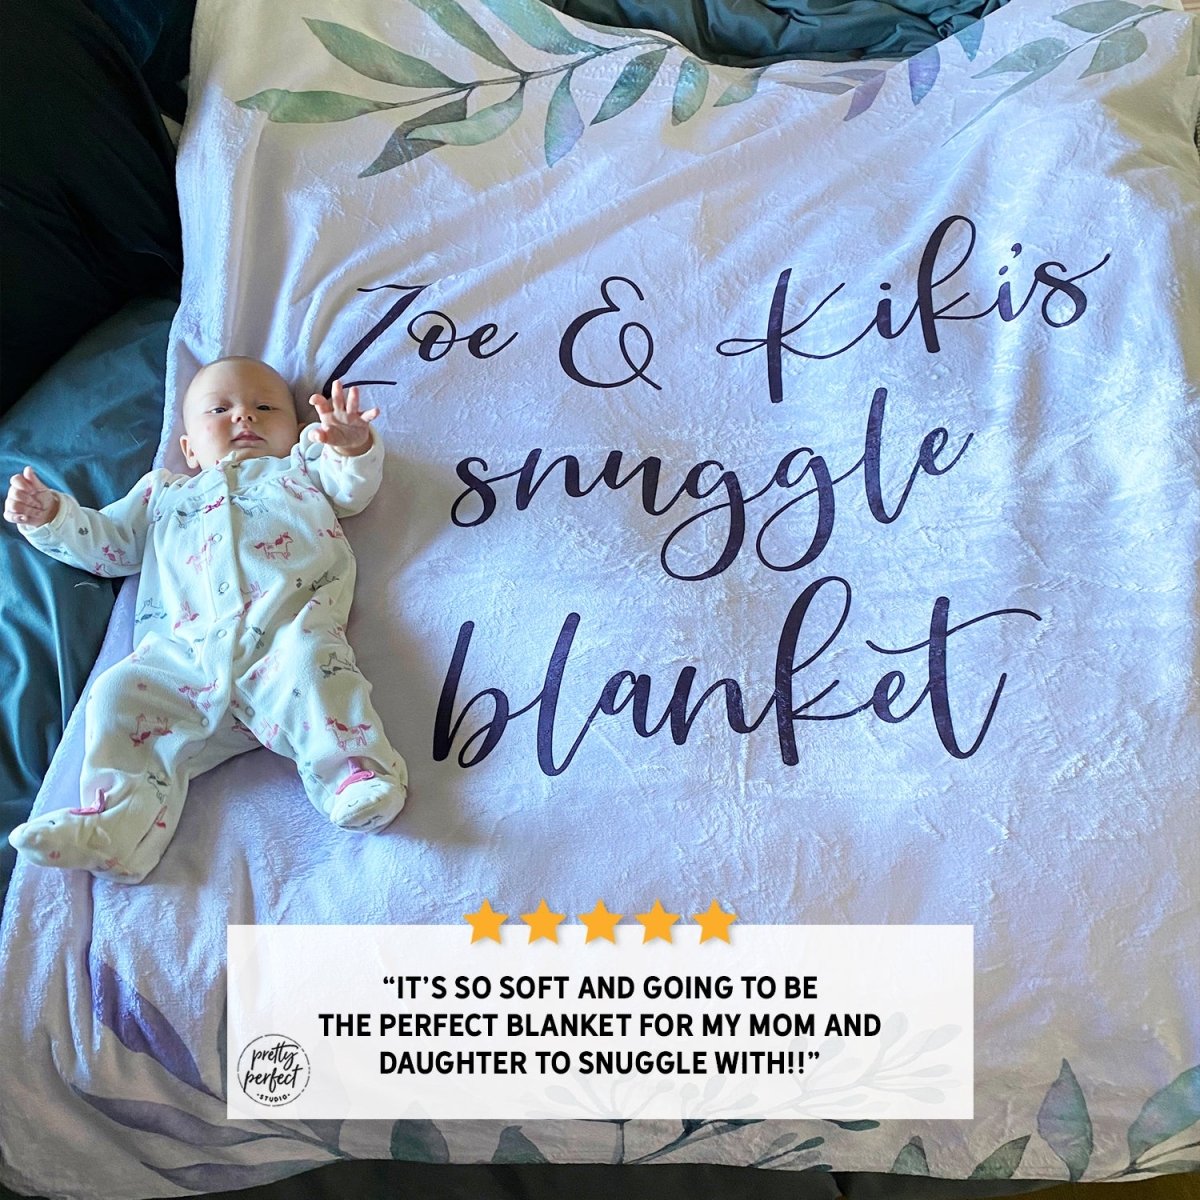 Customer product review for Custom Text Blankets Personalized Fleece Throw Blankets for Kids and Adults with Company Logos, Names, or Family & Friends Pictures by Pretty Perfect Studio